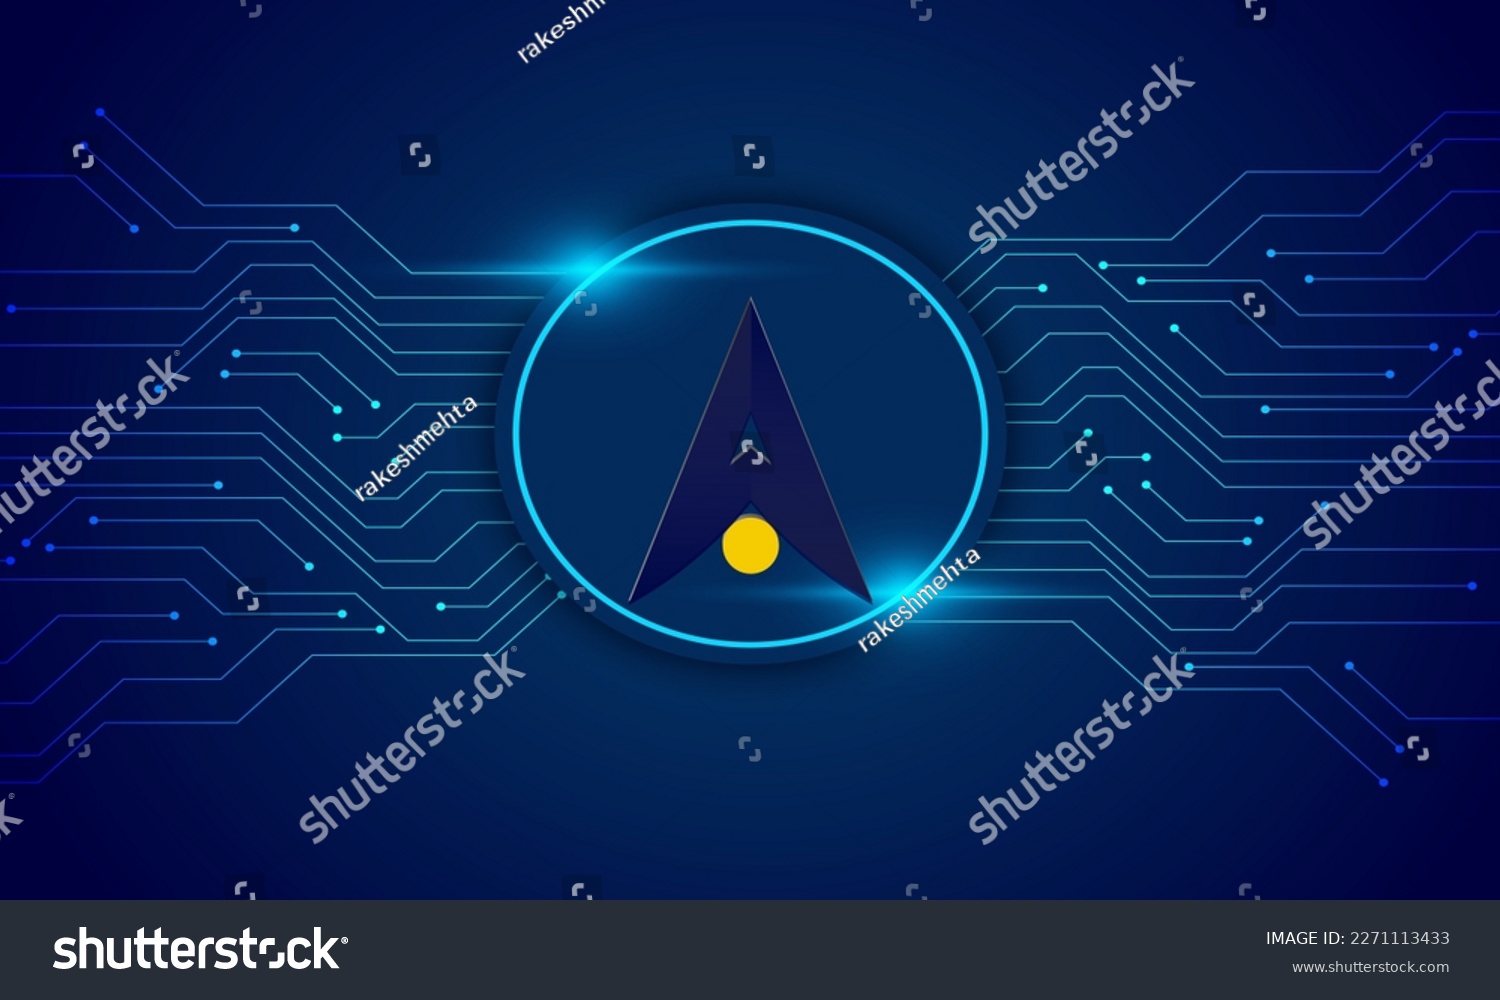 SVG of AlphaVenture Dao token  logo with crypto currency themed circle background design. AlphaVenture Dao currency vector illustration blockchain technology concept  svg